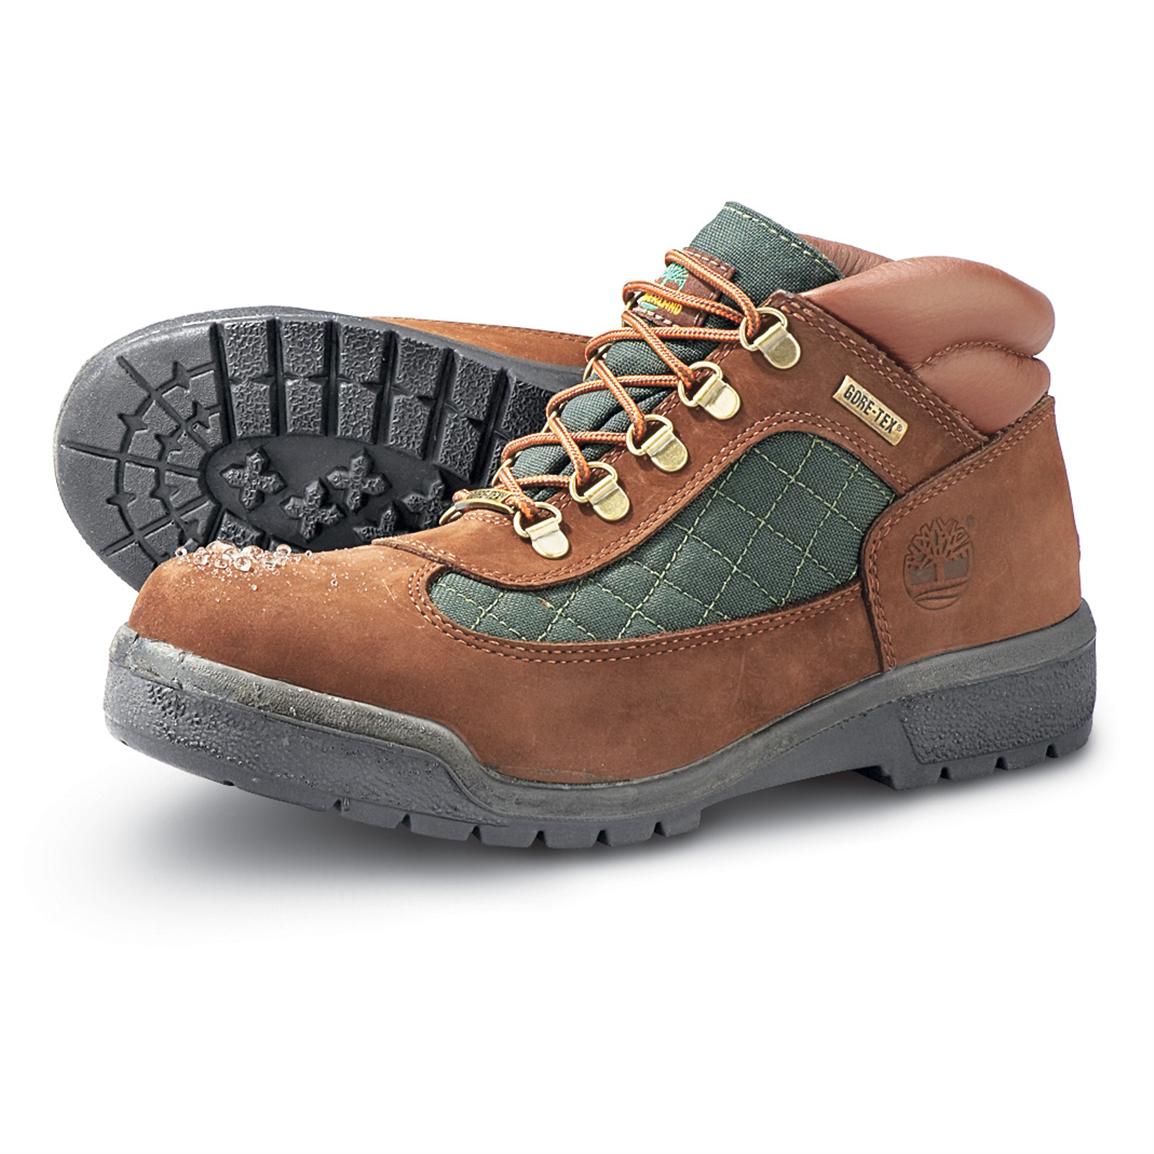 Buy > men's timberland field boots > in stock